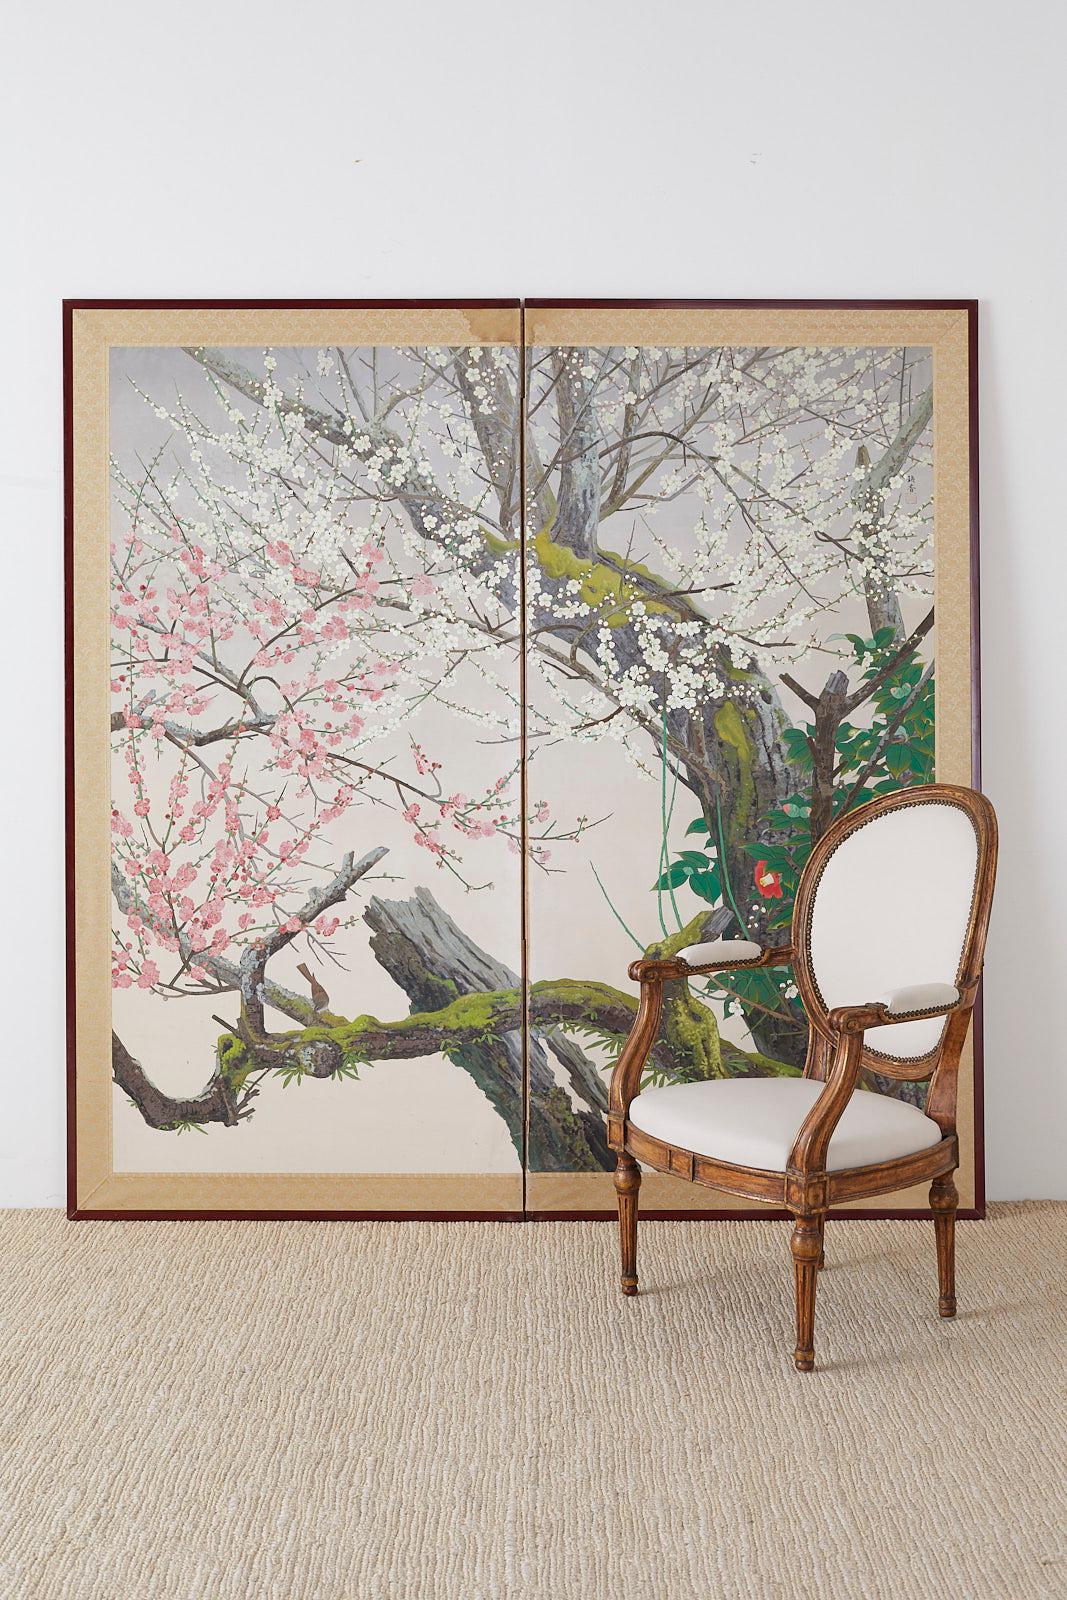 Captivating Japanese two-panel screen depicting early spring flora Prunus blossoms and Camellia on ancient trees. Grand scale screen with a unique modern style that has photorealism qualities that draw you into the colorful scene. Painted in the